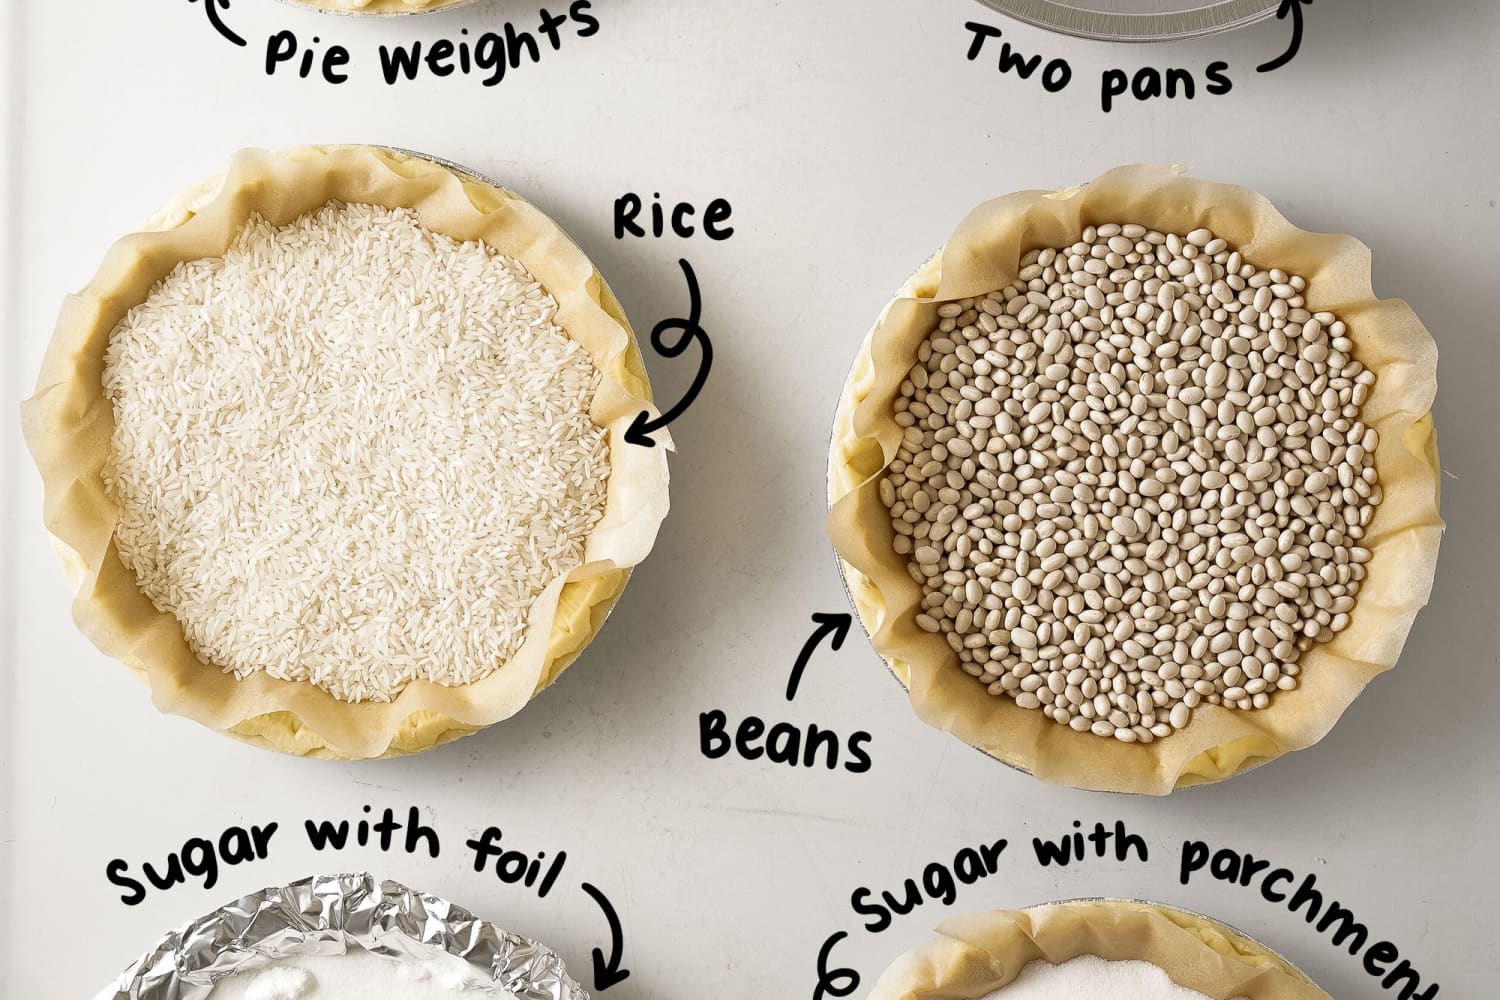 What are Pie Weights? And When Should I Use Them?